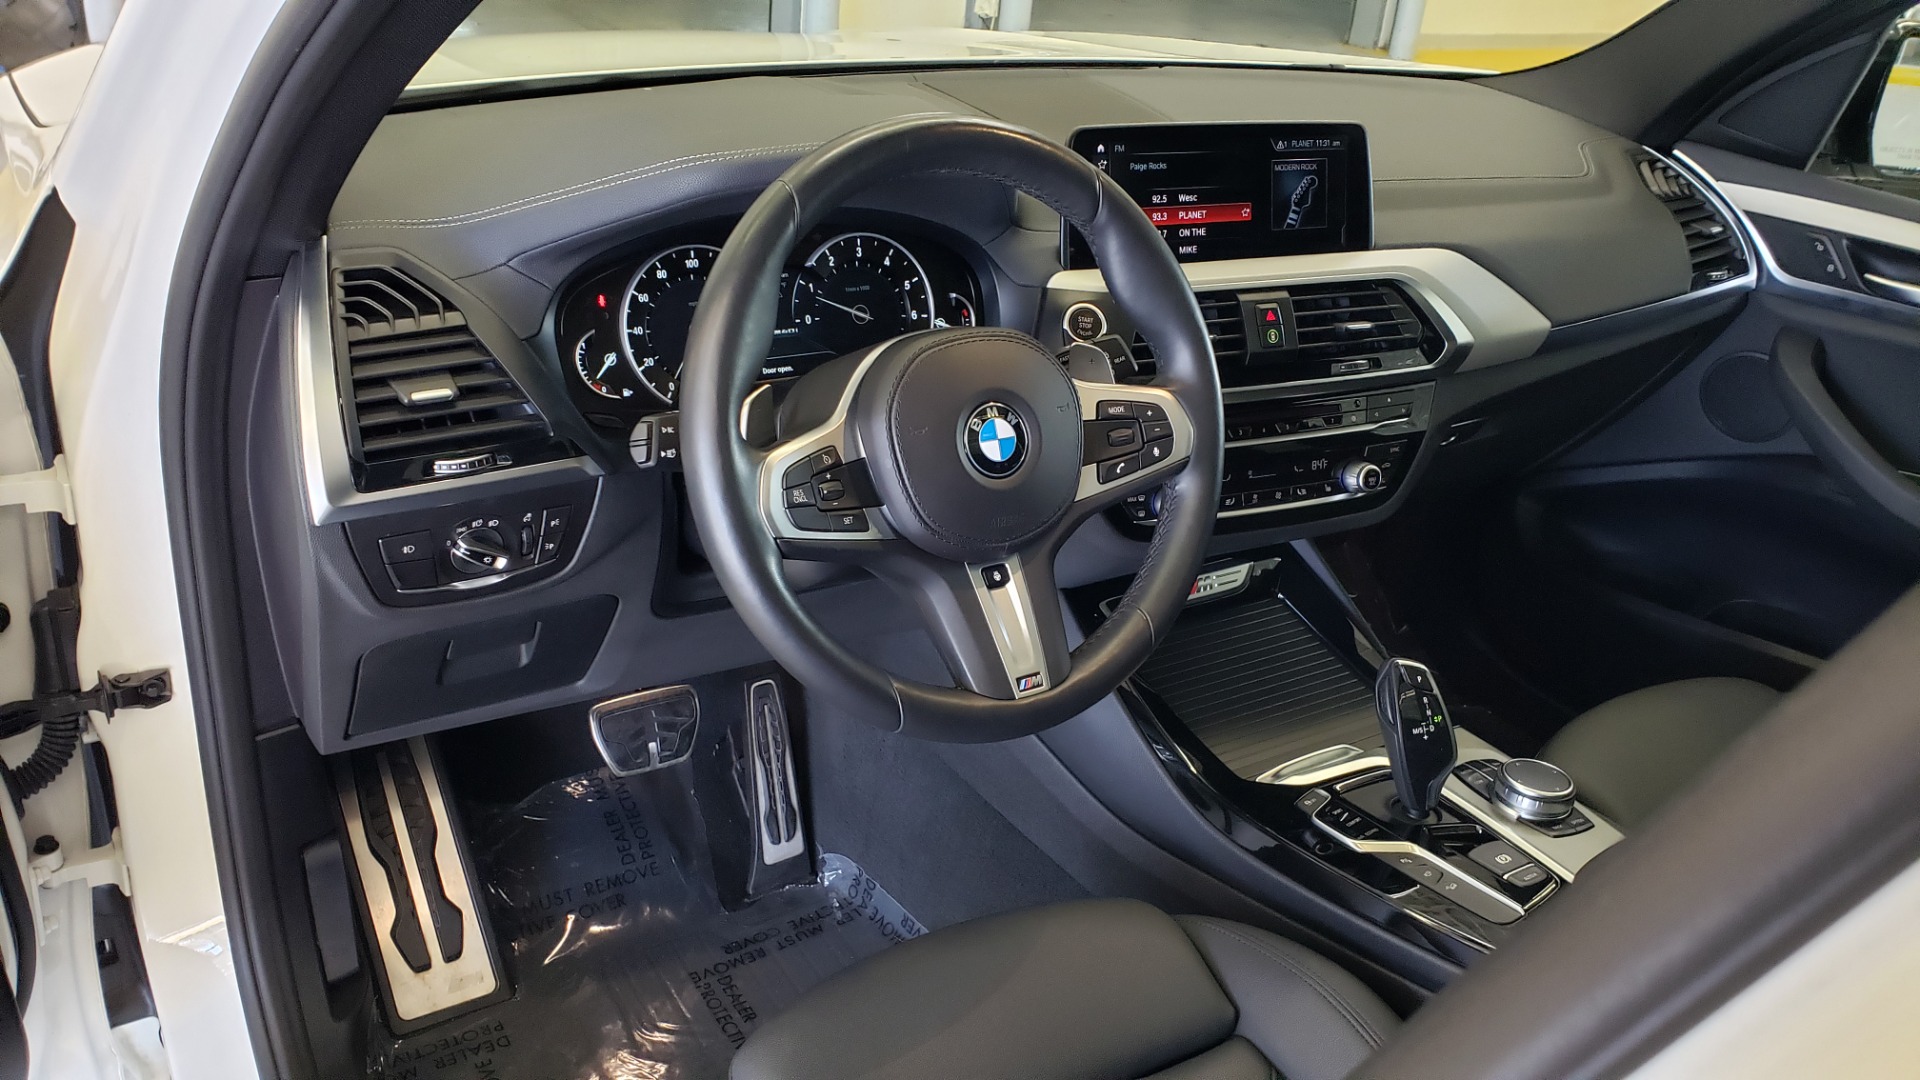 Used 2019 BMW X3 M40I SPORT / NAV / SUNROOF / DRVR ASST / PARK ASST / HTD STS / REARVIEW for sale $53,495 at Formula Imports in Charlotte NC 28227 41